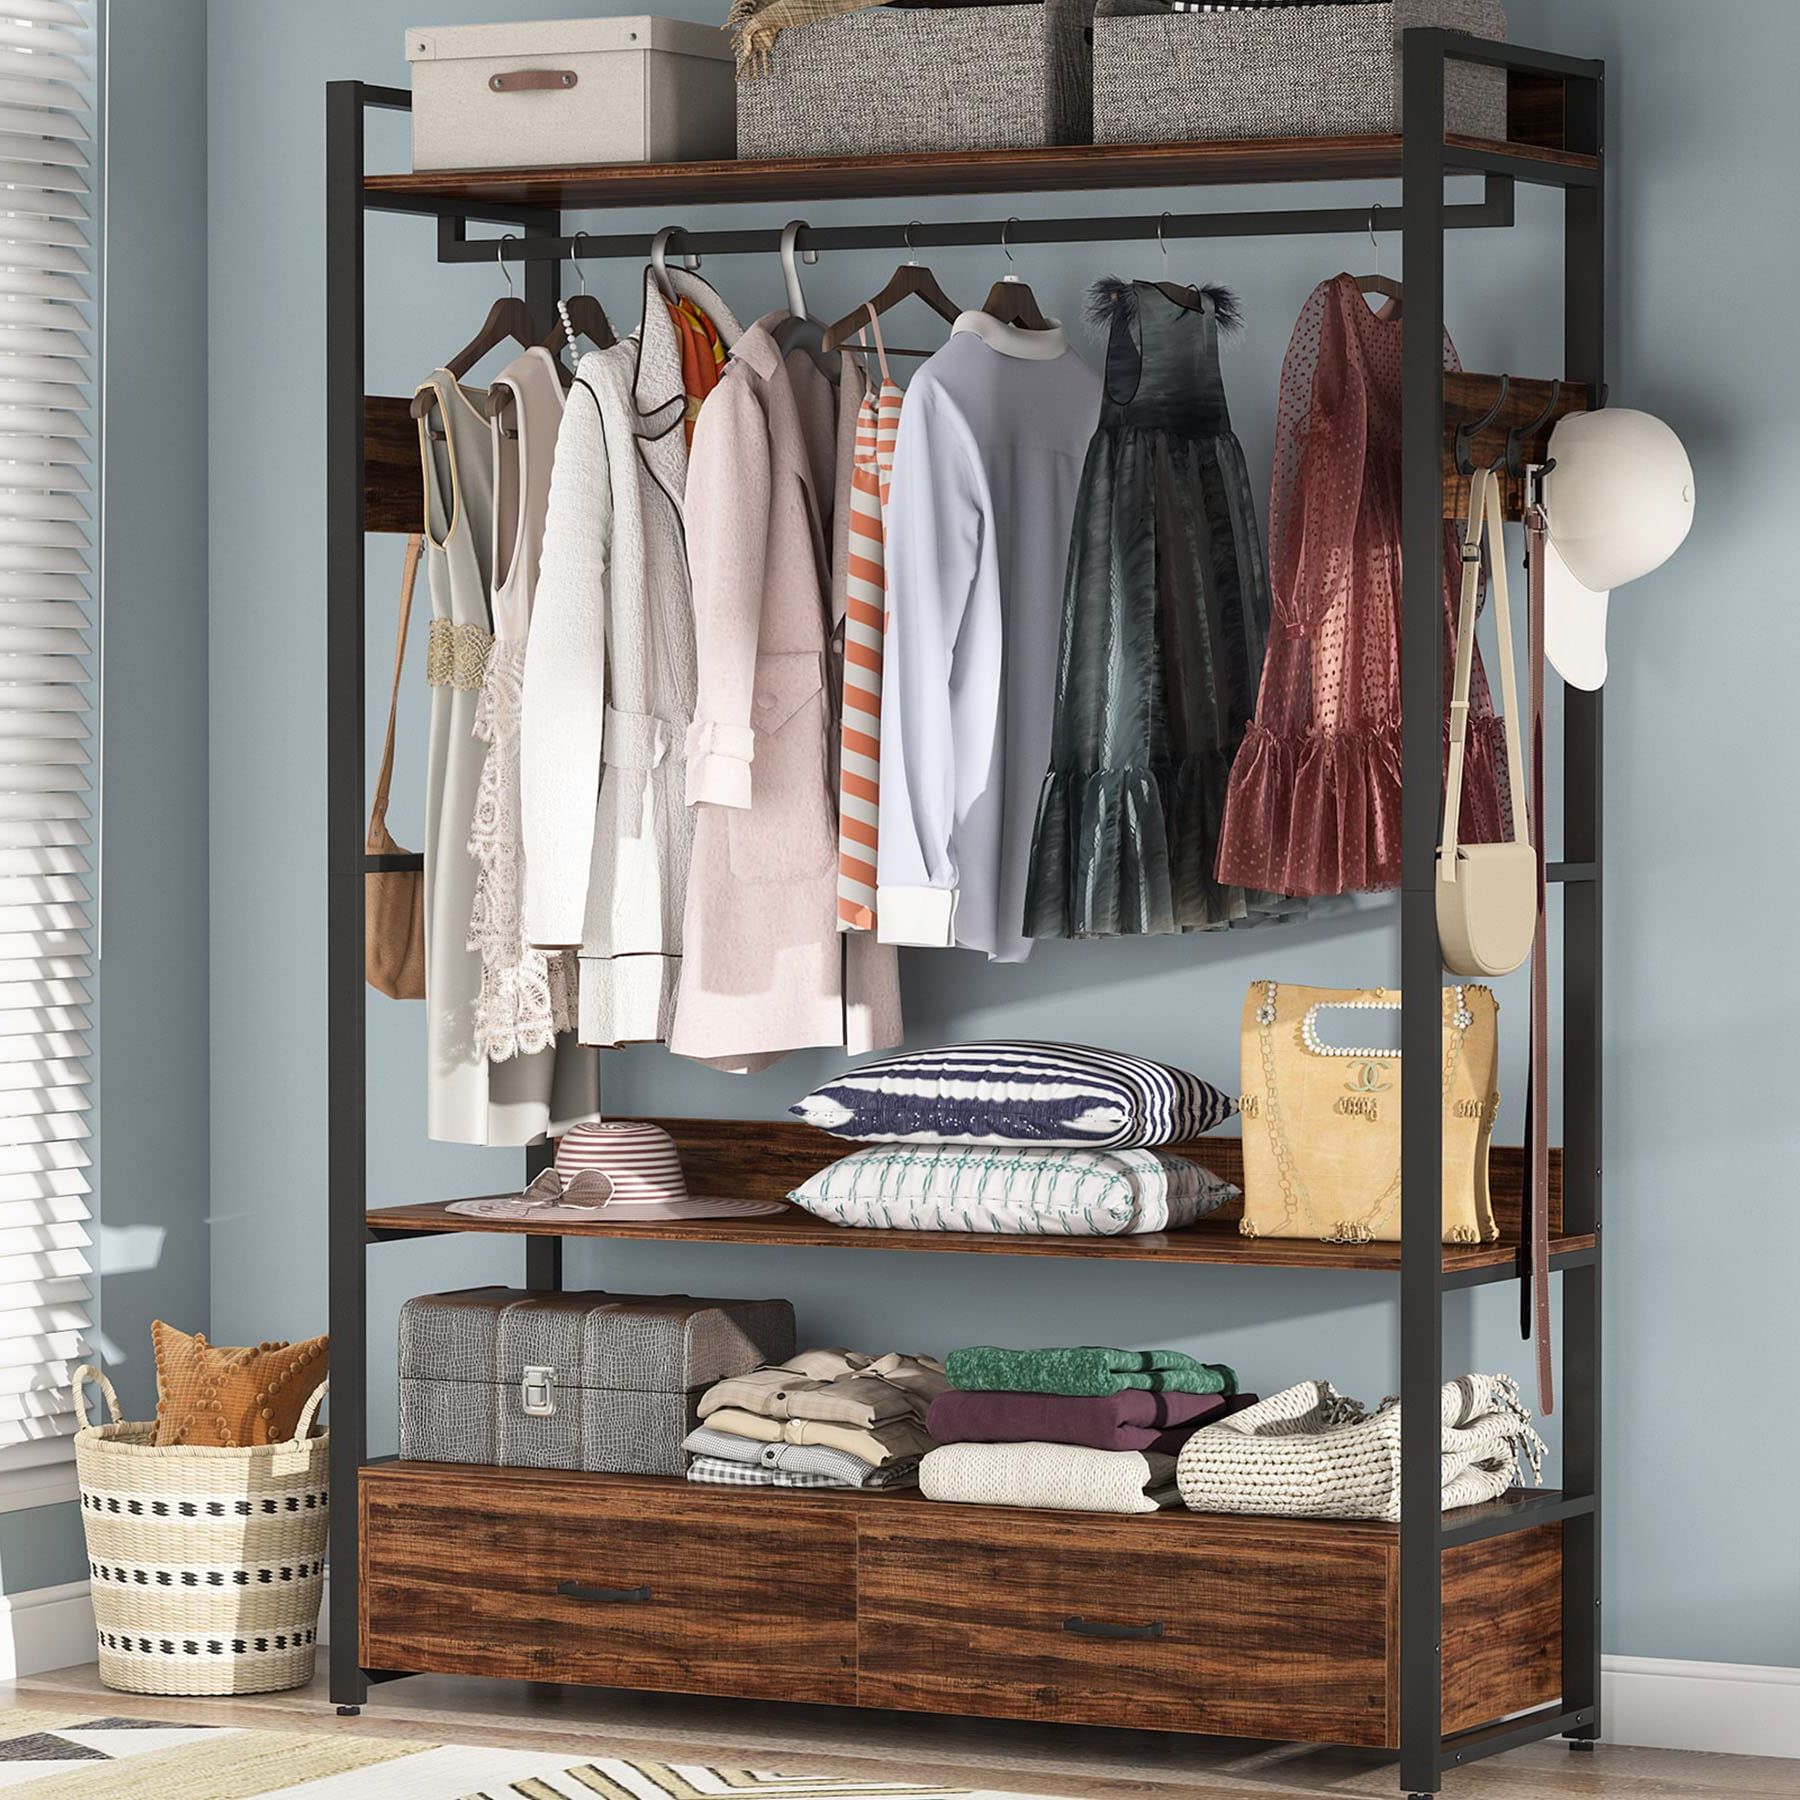 Clothes Rack Wardrobes Intended For Famous Amazon: Tribesigns Freestanding Clothes Rack Shelves, Closet Organizer  With Shelves Drawers And Hooks, Heavy Duty Garment Clothing Wardrobe  Storage Shelving With Hanging Rod, Rustic : Home & Kitchen (View 3 of 10)